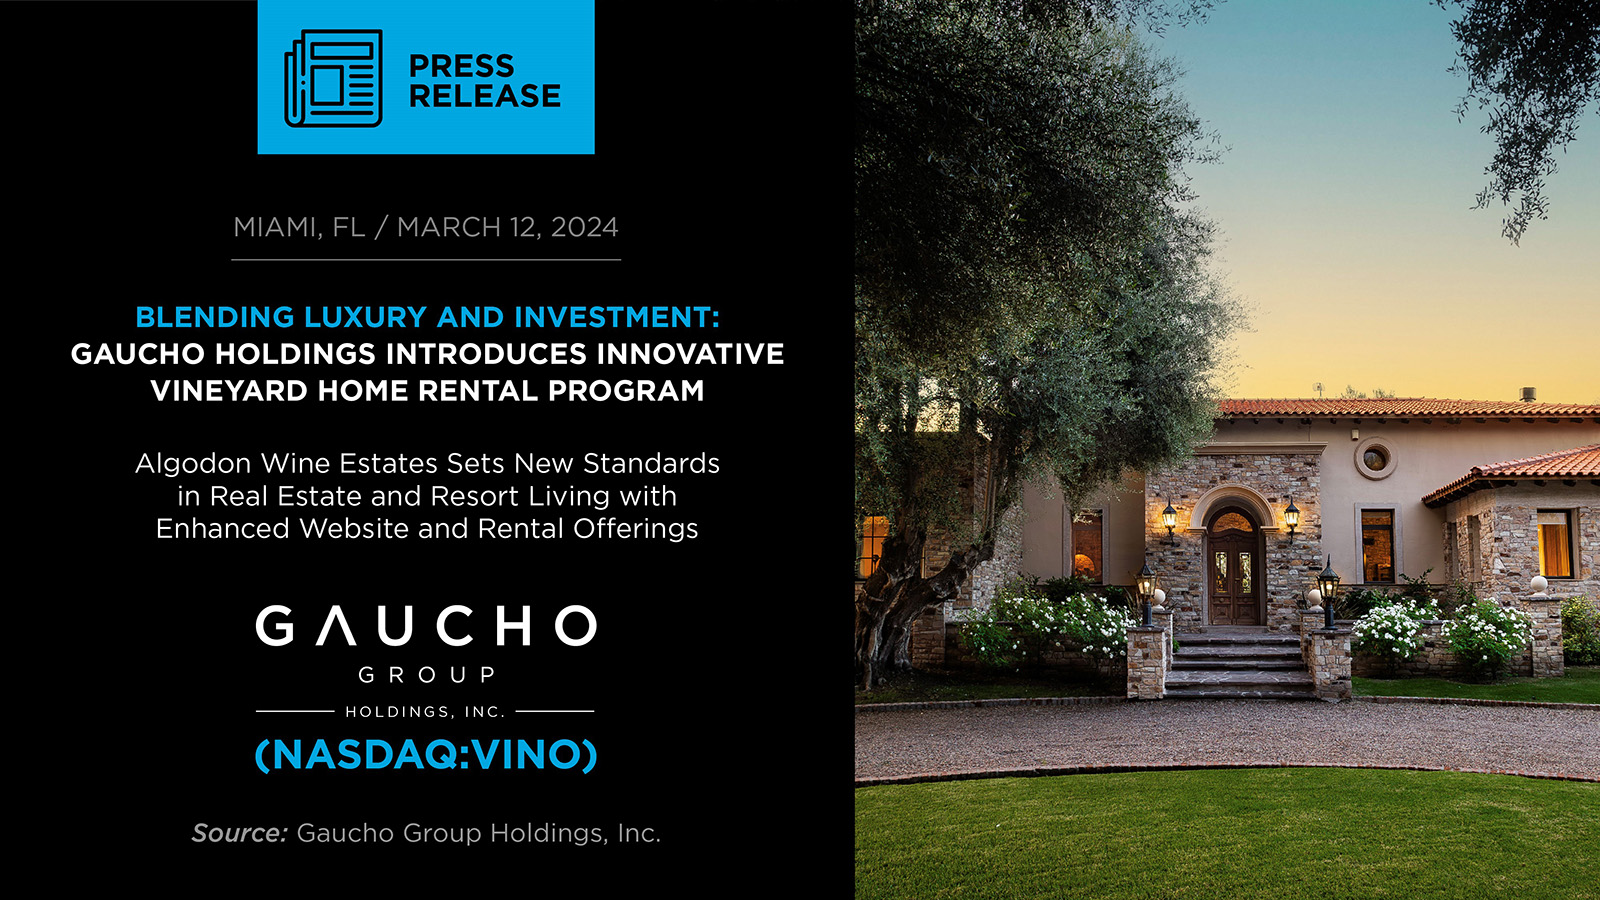 BLENDING LUXURY AND INVESTMENT: GAUCHO HOLDINGS INTRODUCES INNOVATIVE VINEYARD HOME RENTAL PROGRAM